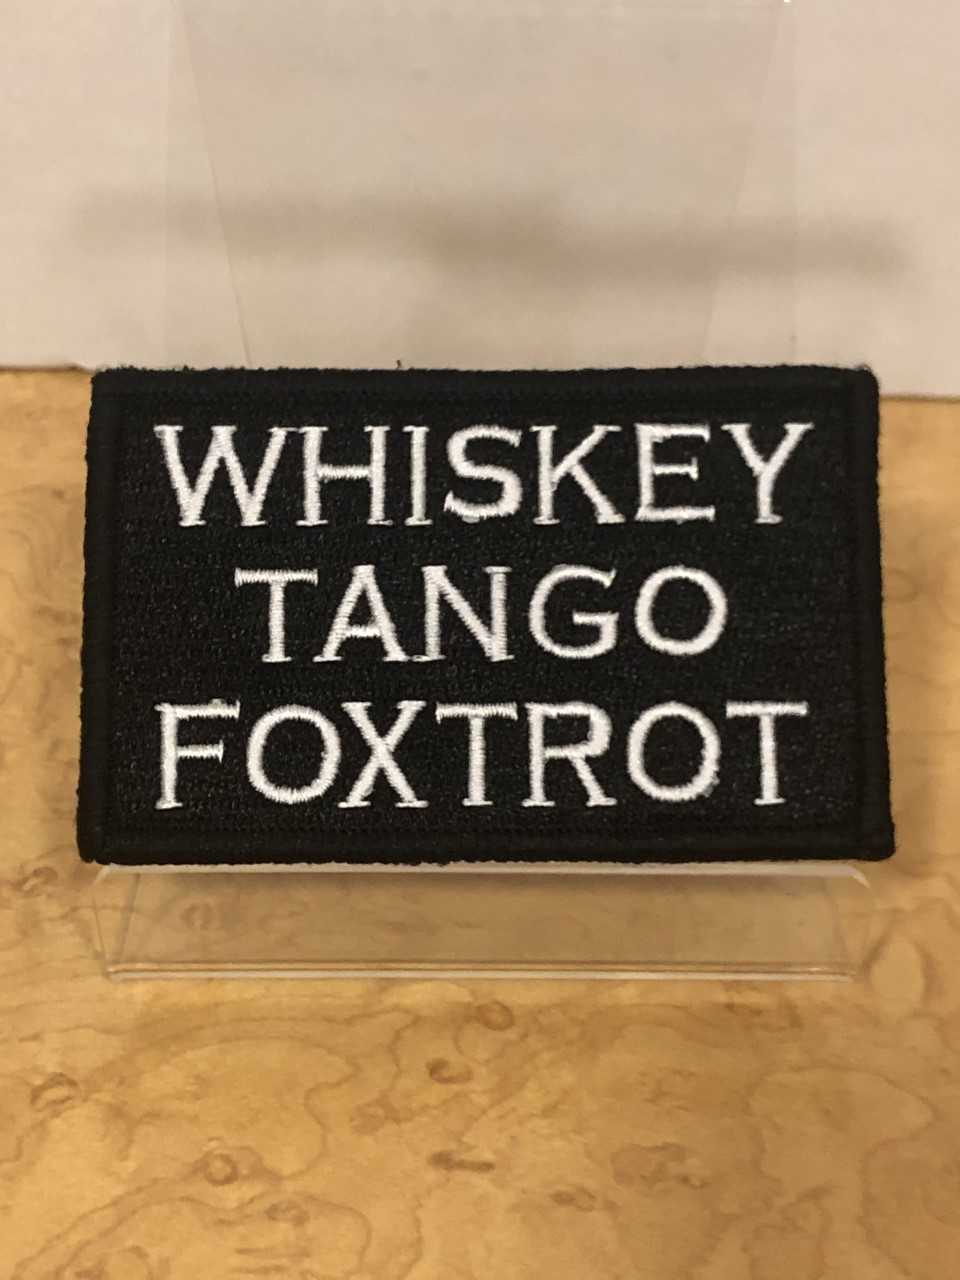 Whiskey Tango Foxtrot "WTF" (white lettering) Velcro Patch